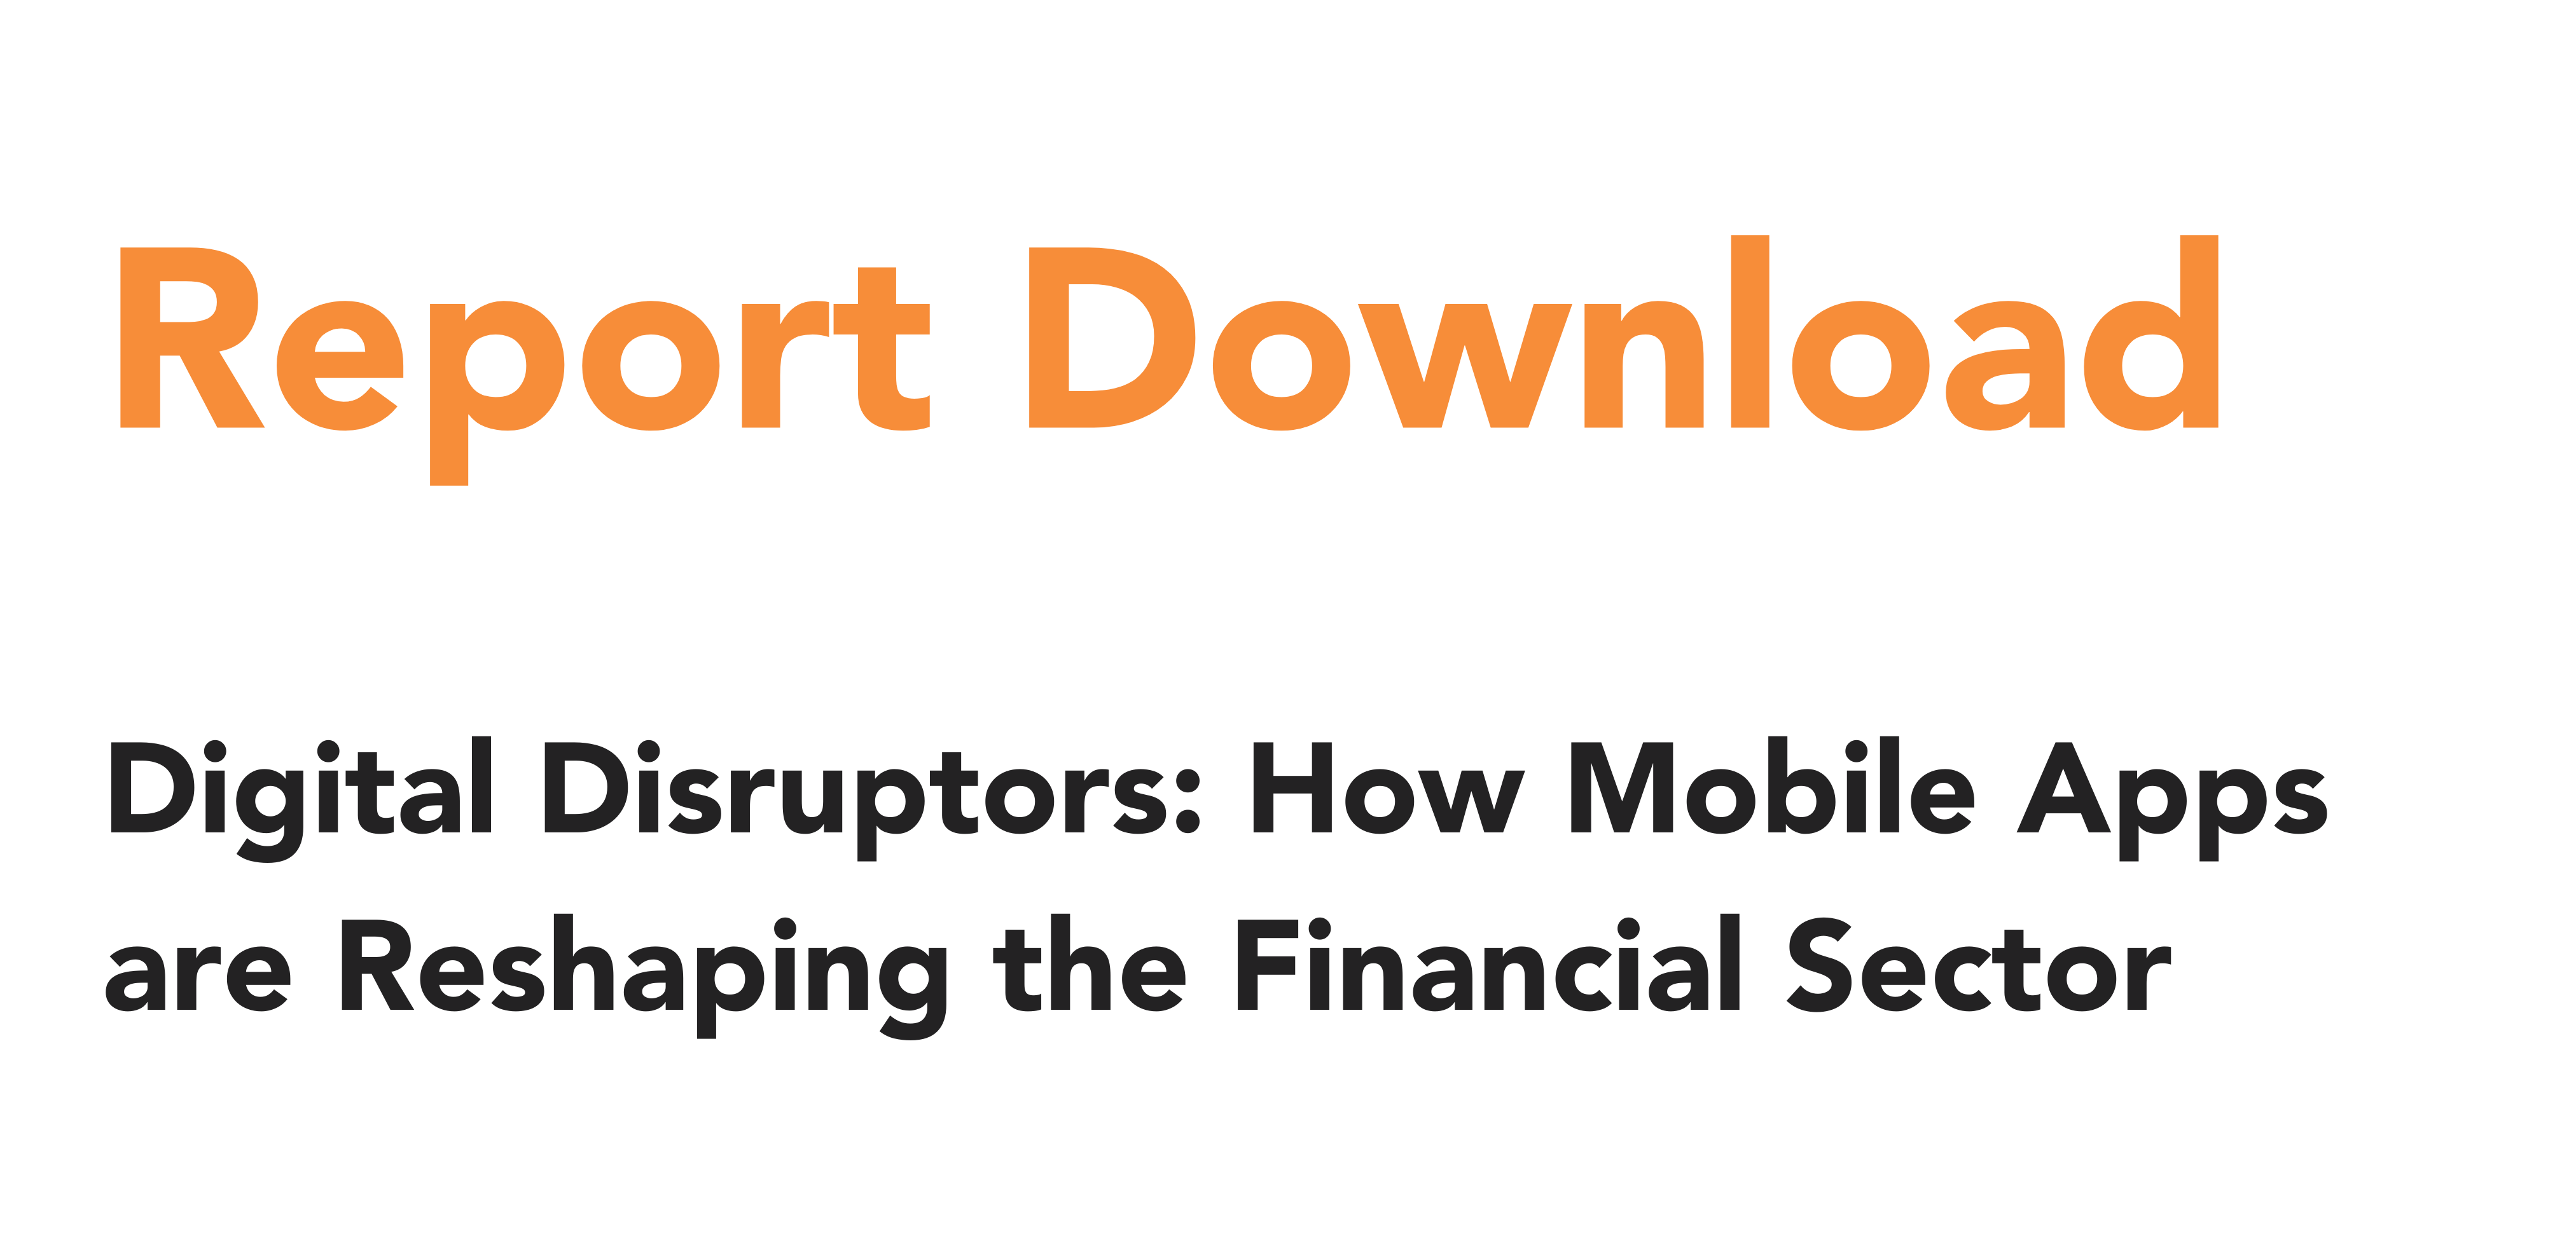 Report Download Digital Disruptors_ How Mobile Apps are Reshaping the Financial Sector